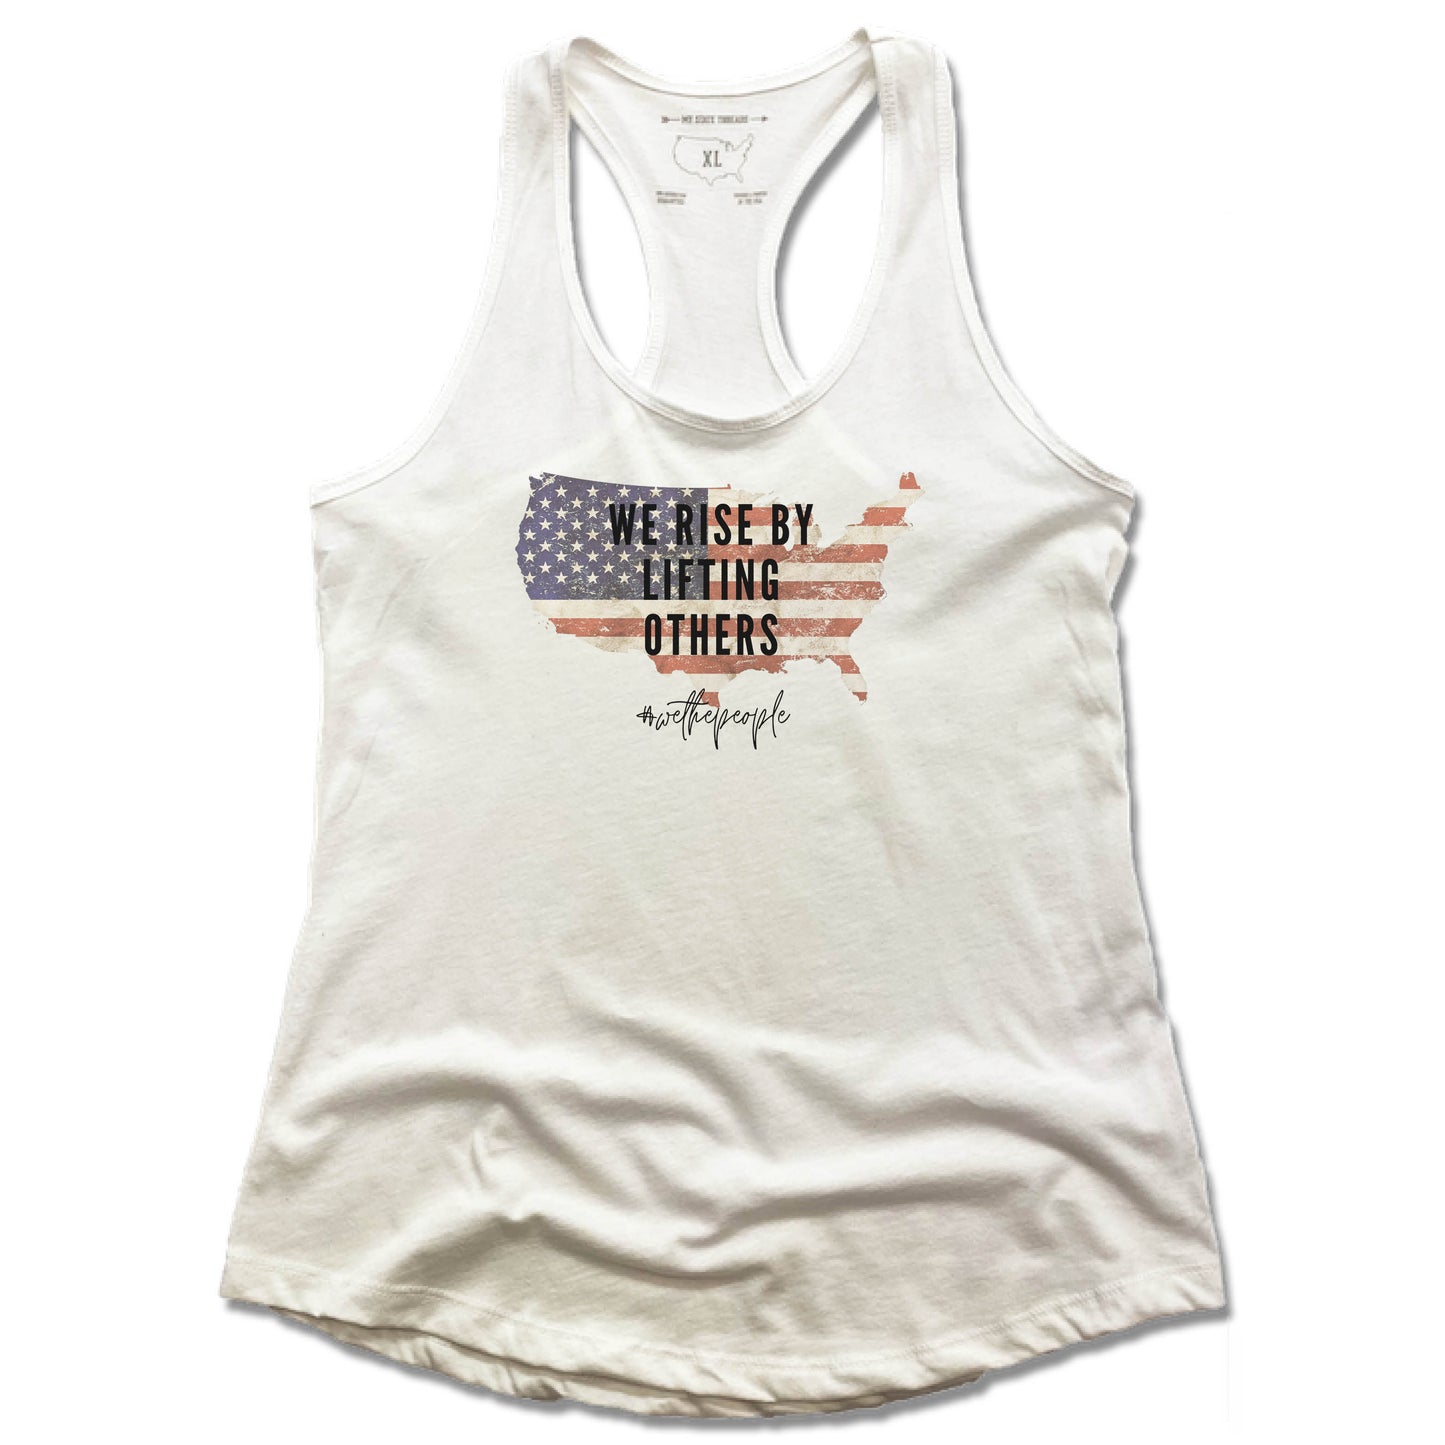 THE SISTER'S CLOSET | LADIES WHITE TANK | LIFTING OTHERS